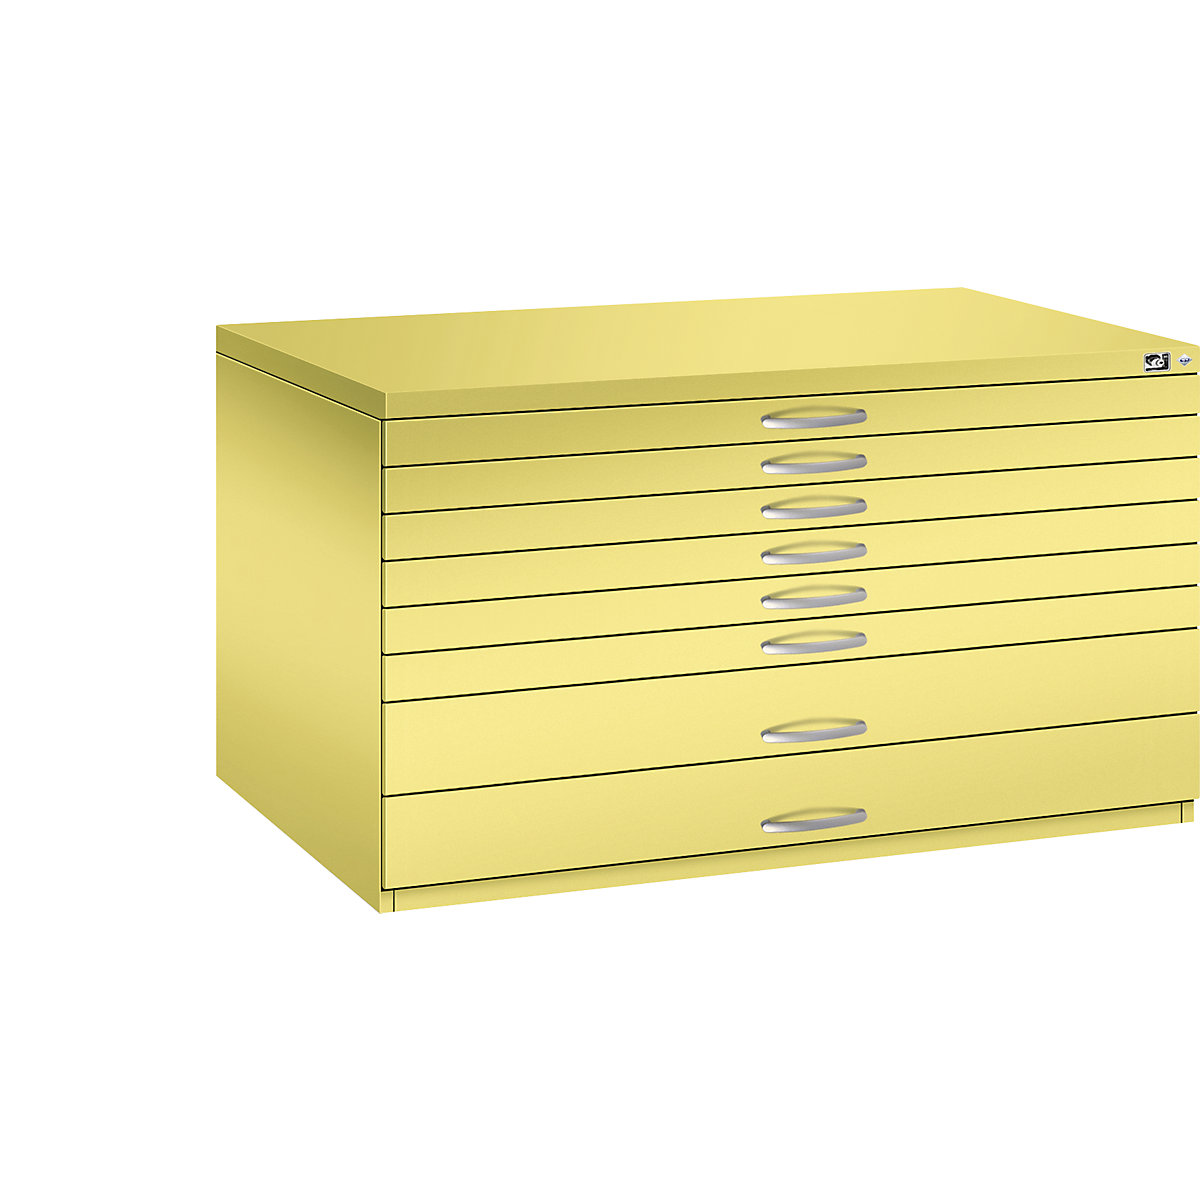 Drawing cabinet – C+P, A0, 8 drawers, height 760 mm, sulphur yellow-21